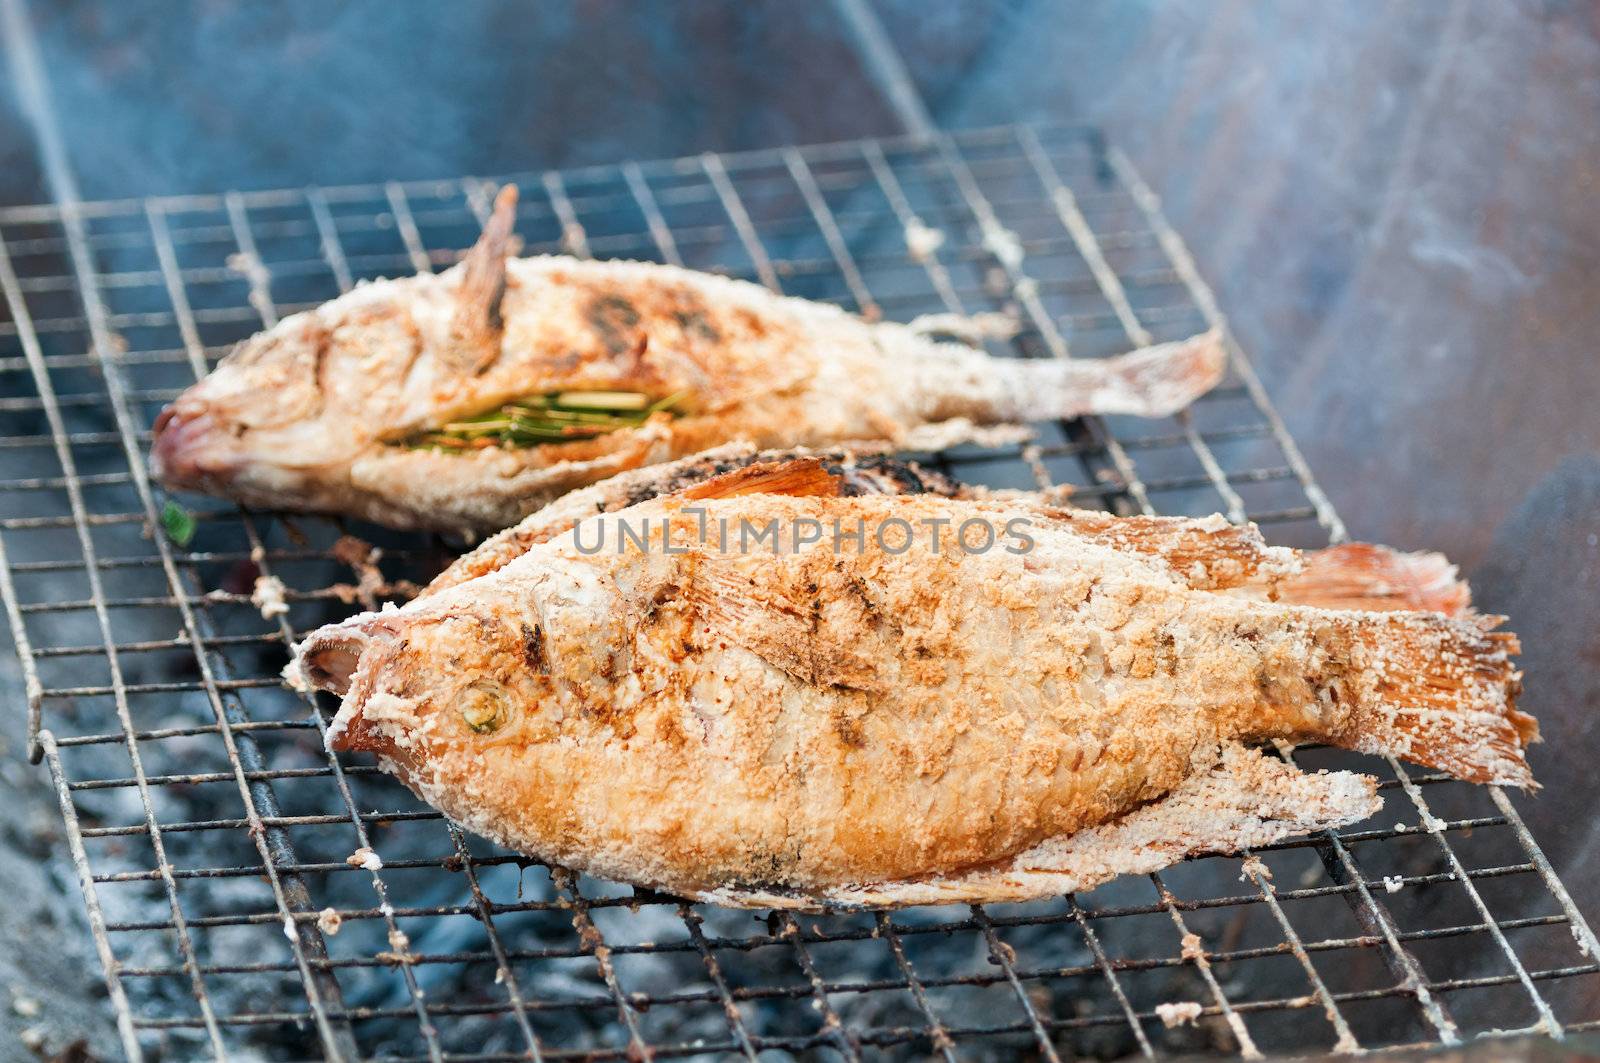 Two grilling sea fishes on campfire grate